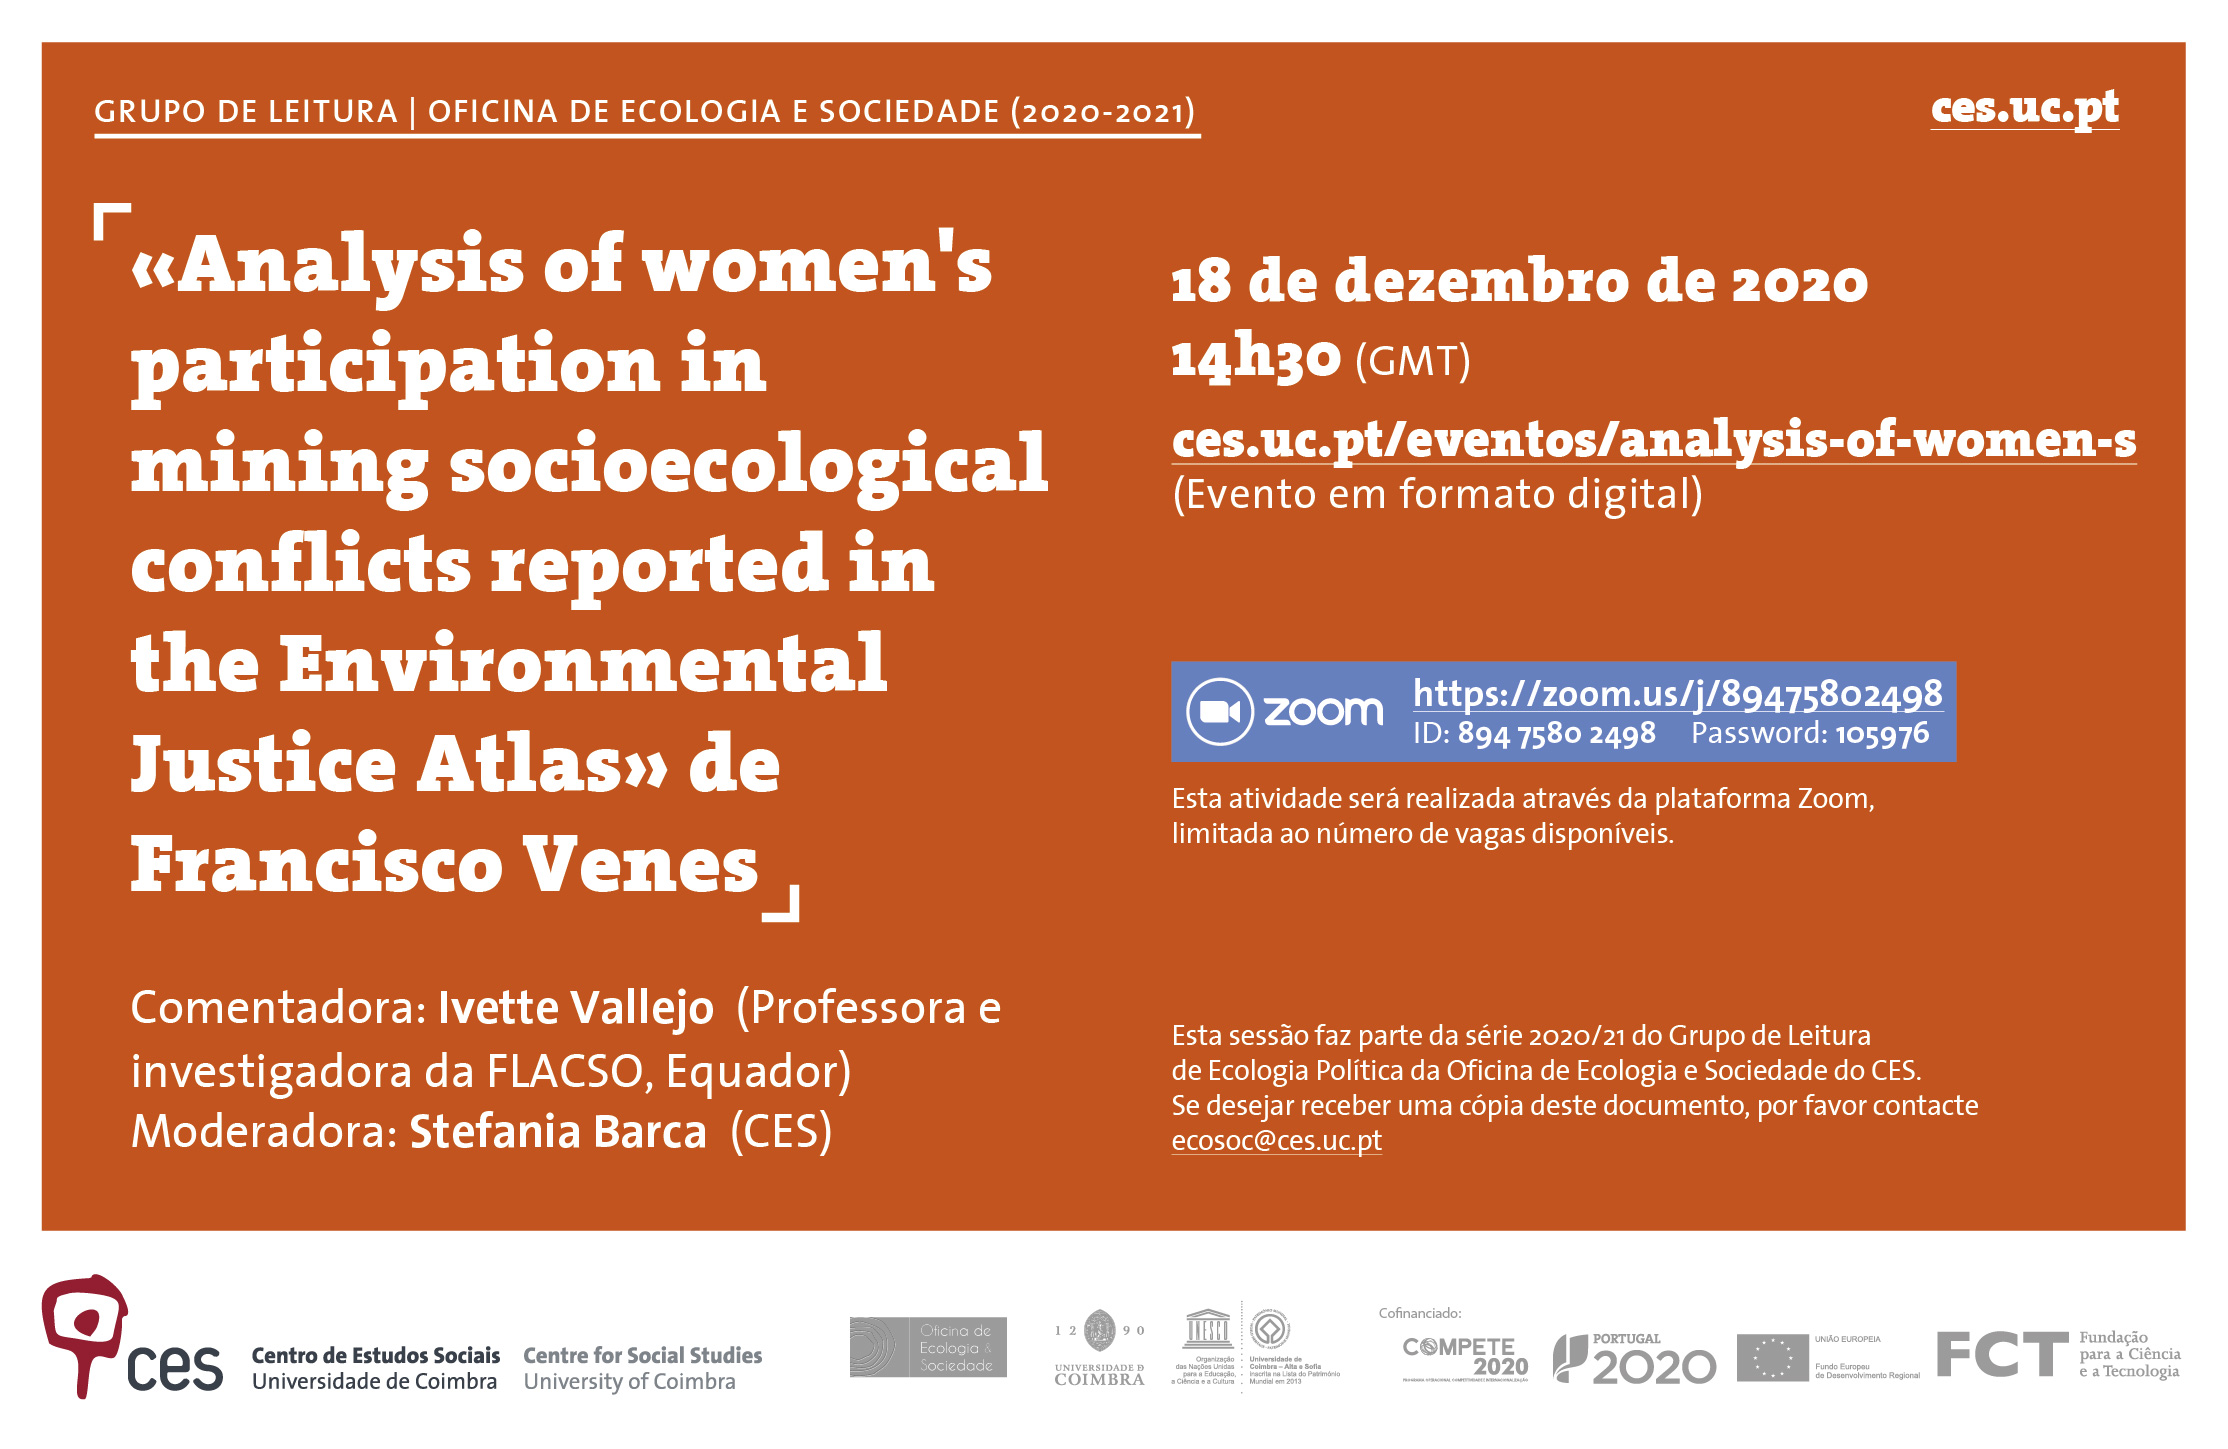 "Analysis of women's participation in mining socioecological conflicts reported<br />
	in the Environmental Justice Atlas" by Francisco Venes<span id="edit_31767"><script>$(function() { $('#edit_31767').load( "/myces/user/editobj.php?tipo=evento&id=31767" ); });</script></span>